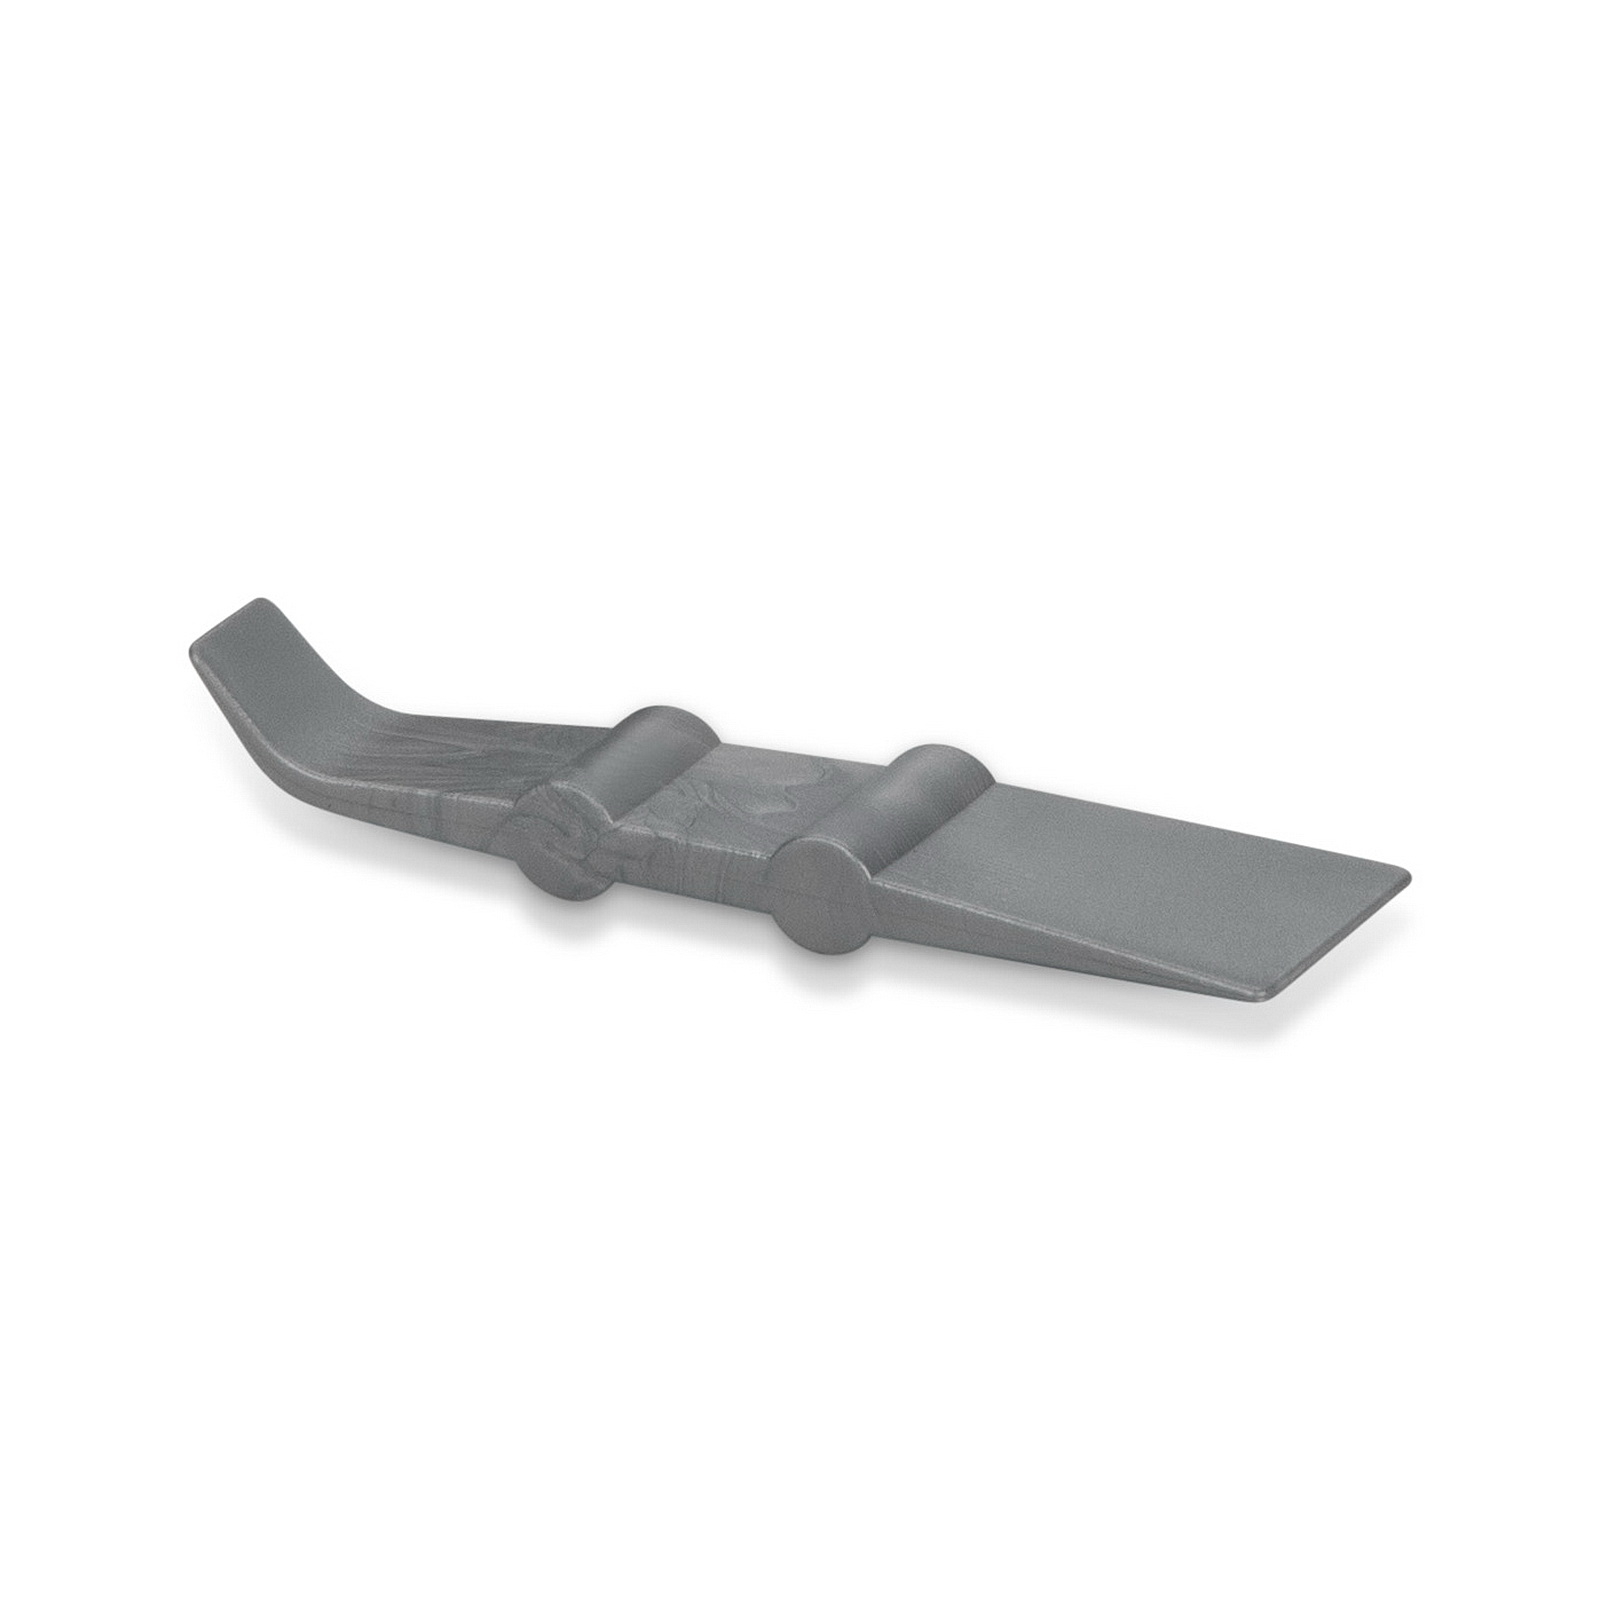 1'' x 2-1/2'' Gray 135 Degree Squeegee, Medium Hardness for Film and Vinyl Tucking